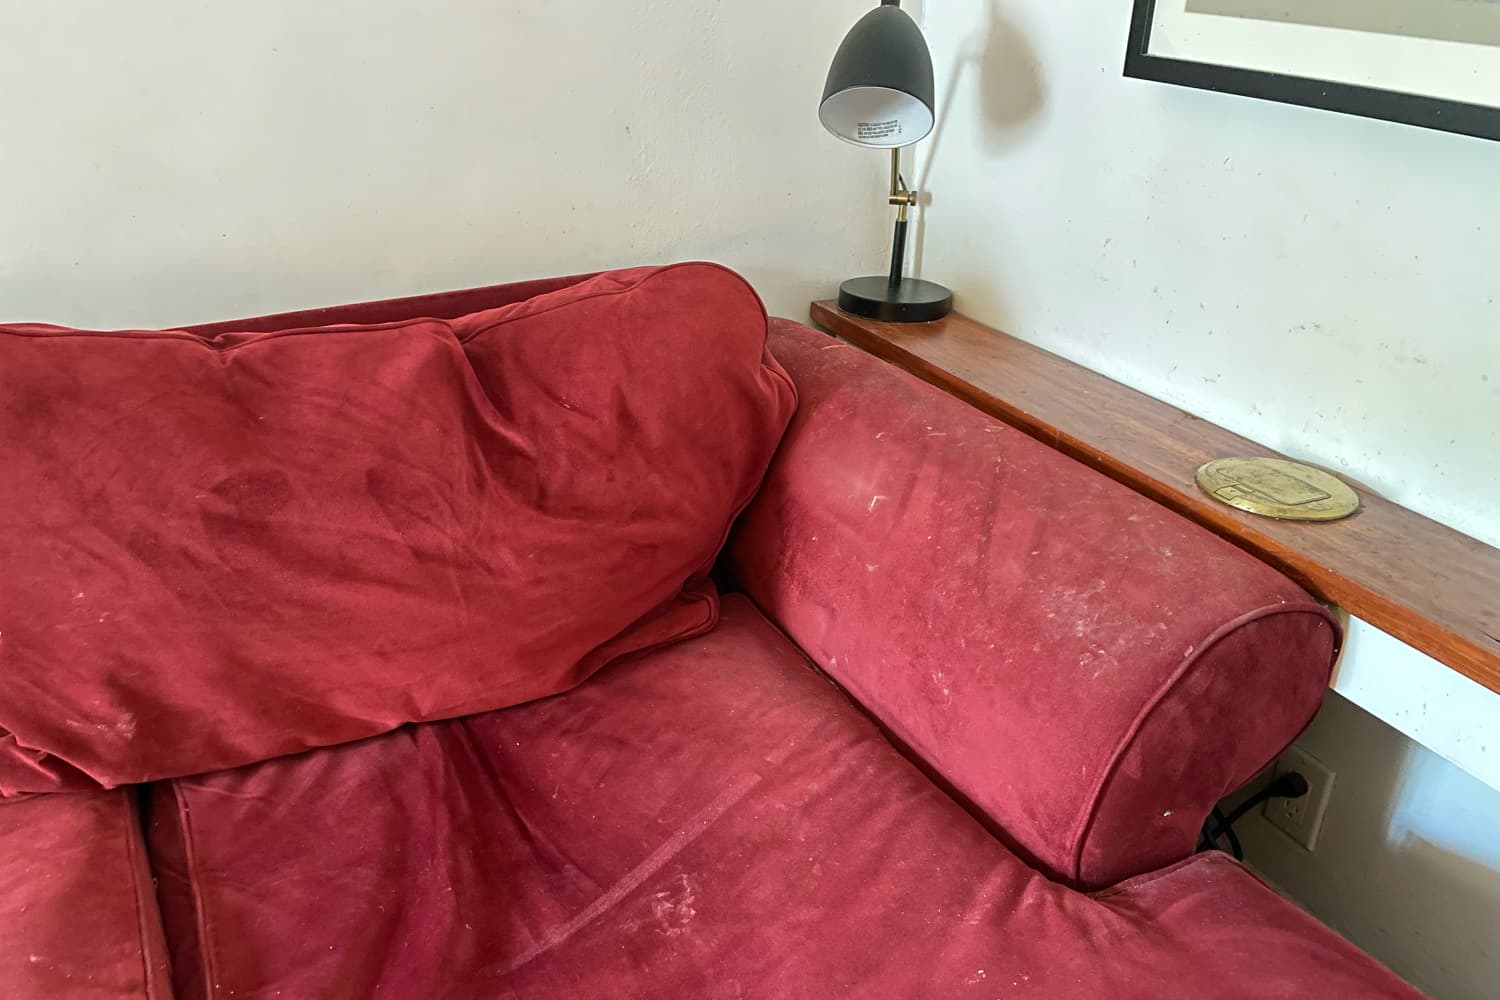 I Tried This Viral Upholstery-Cleansing Hack on My Filthy Sofa — And You Must See the Outcomes